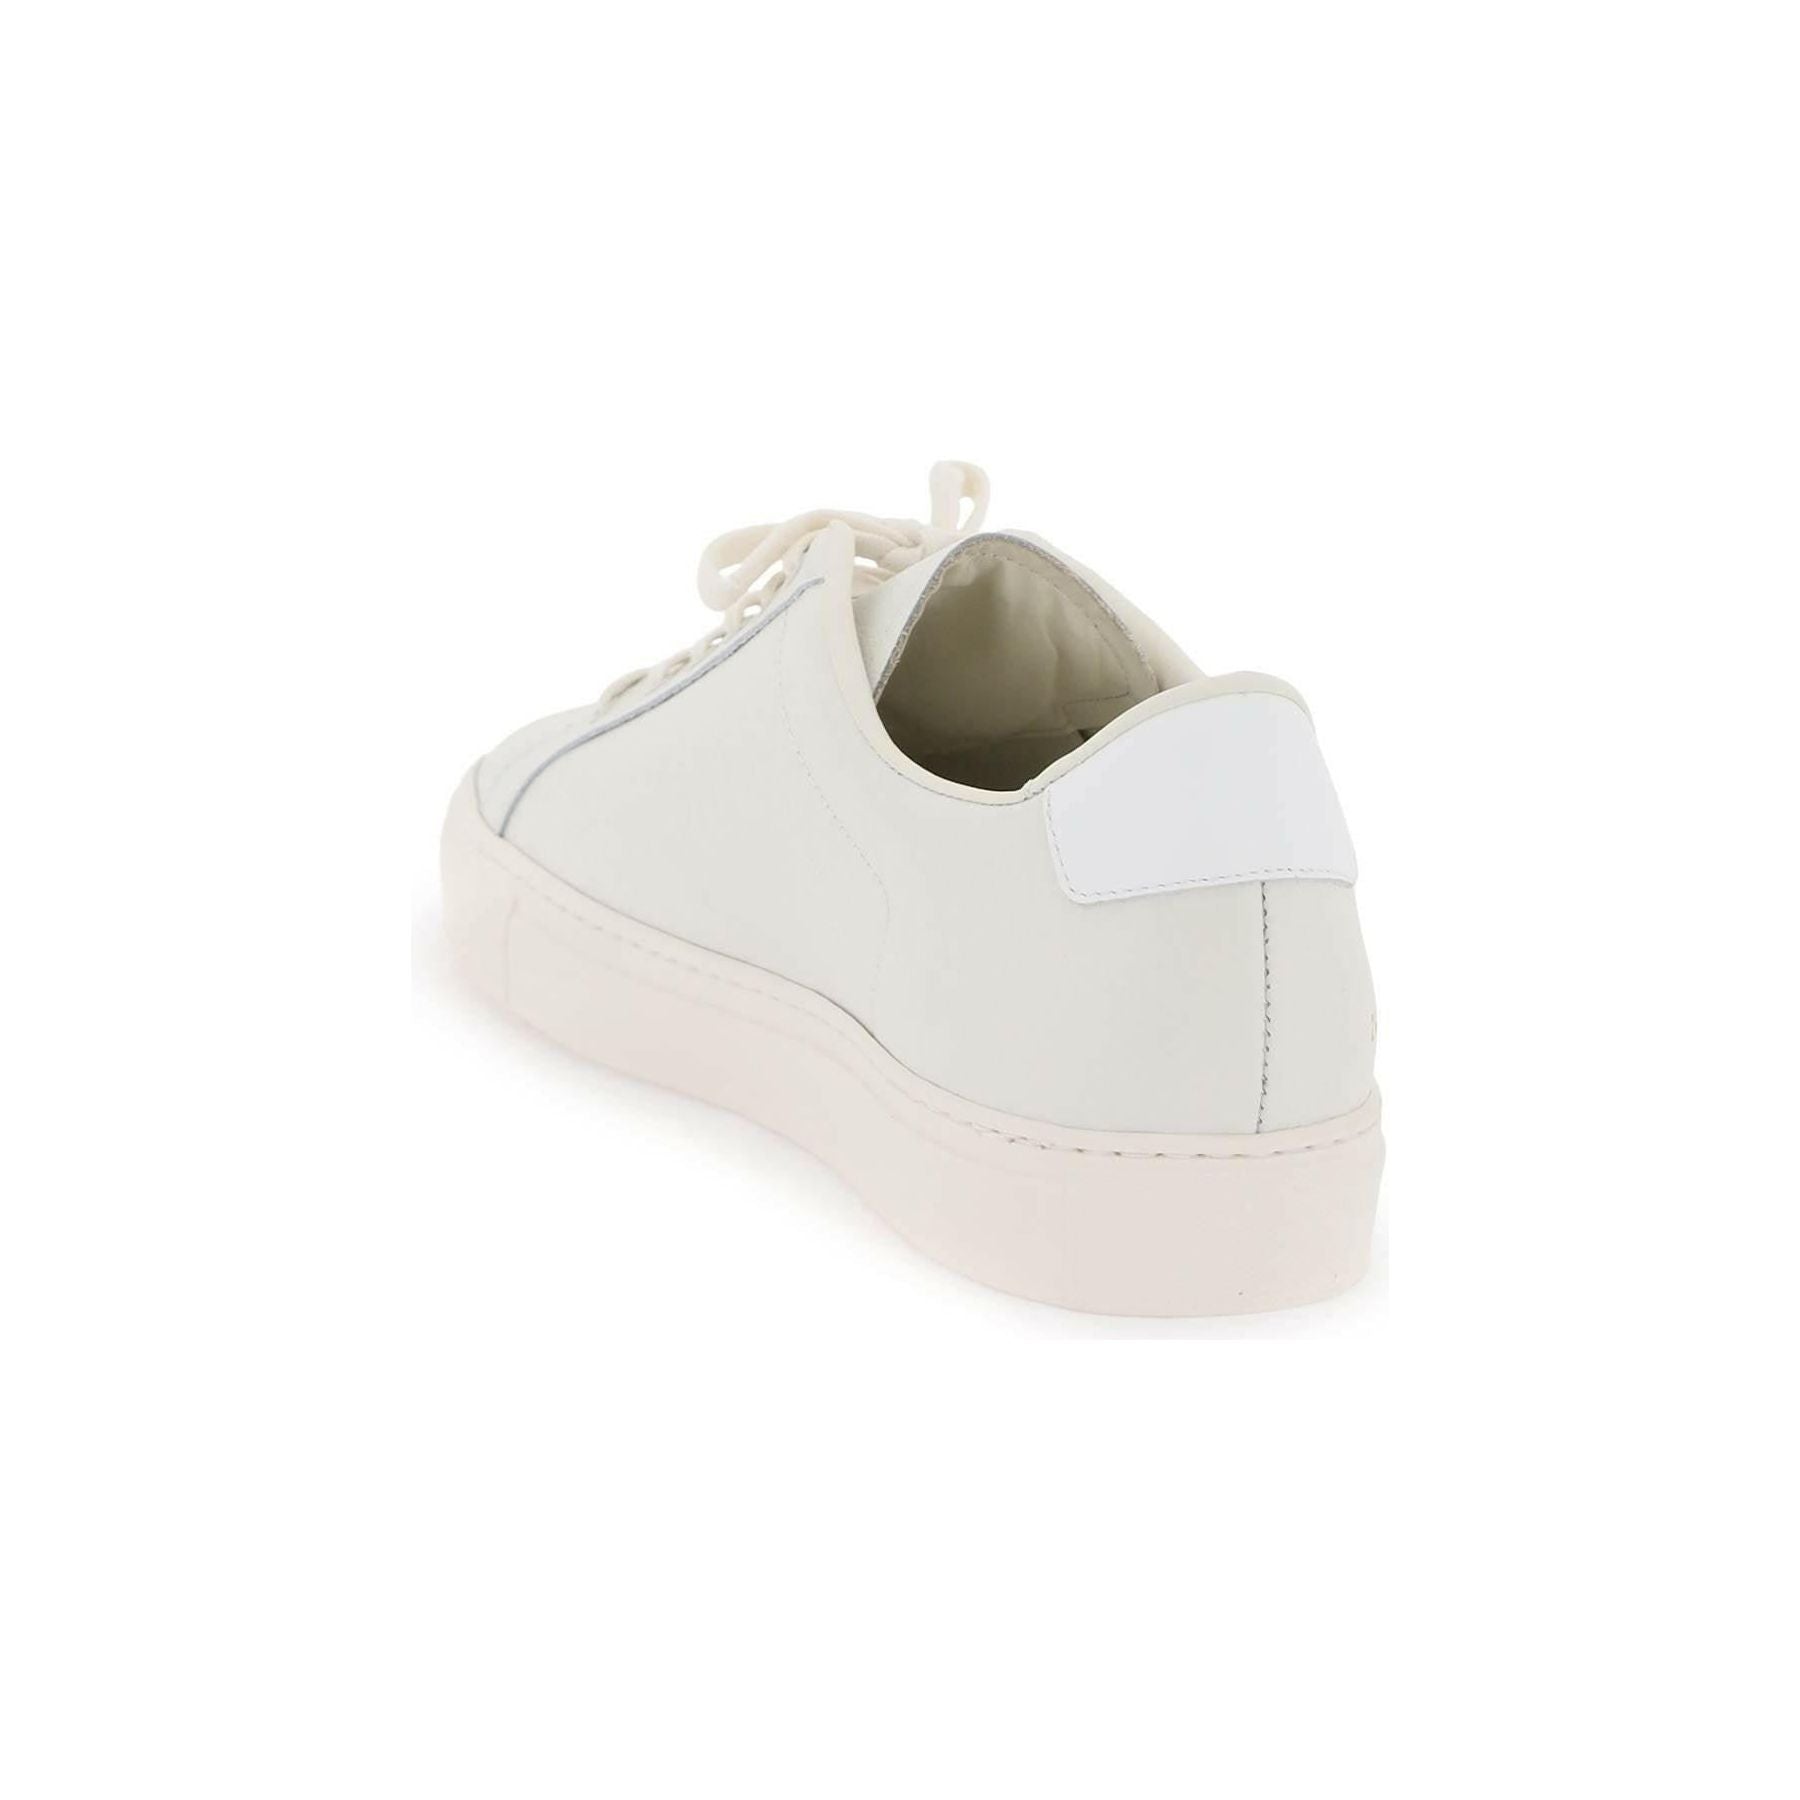 Vintage White Retro Low-Top Leather Sneakers COMMON PROJECTS JOHN JULIA.